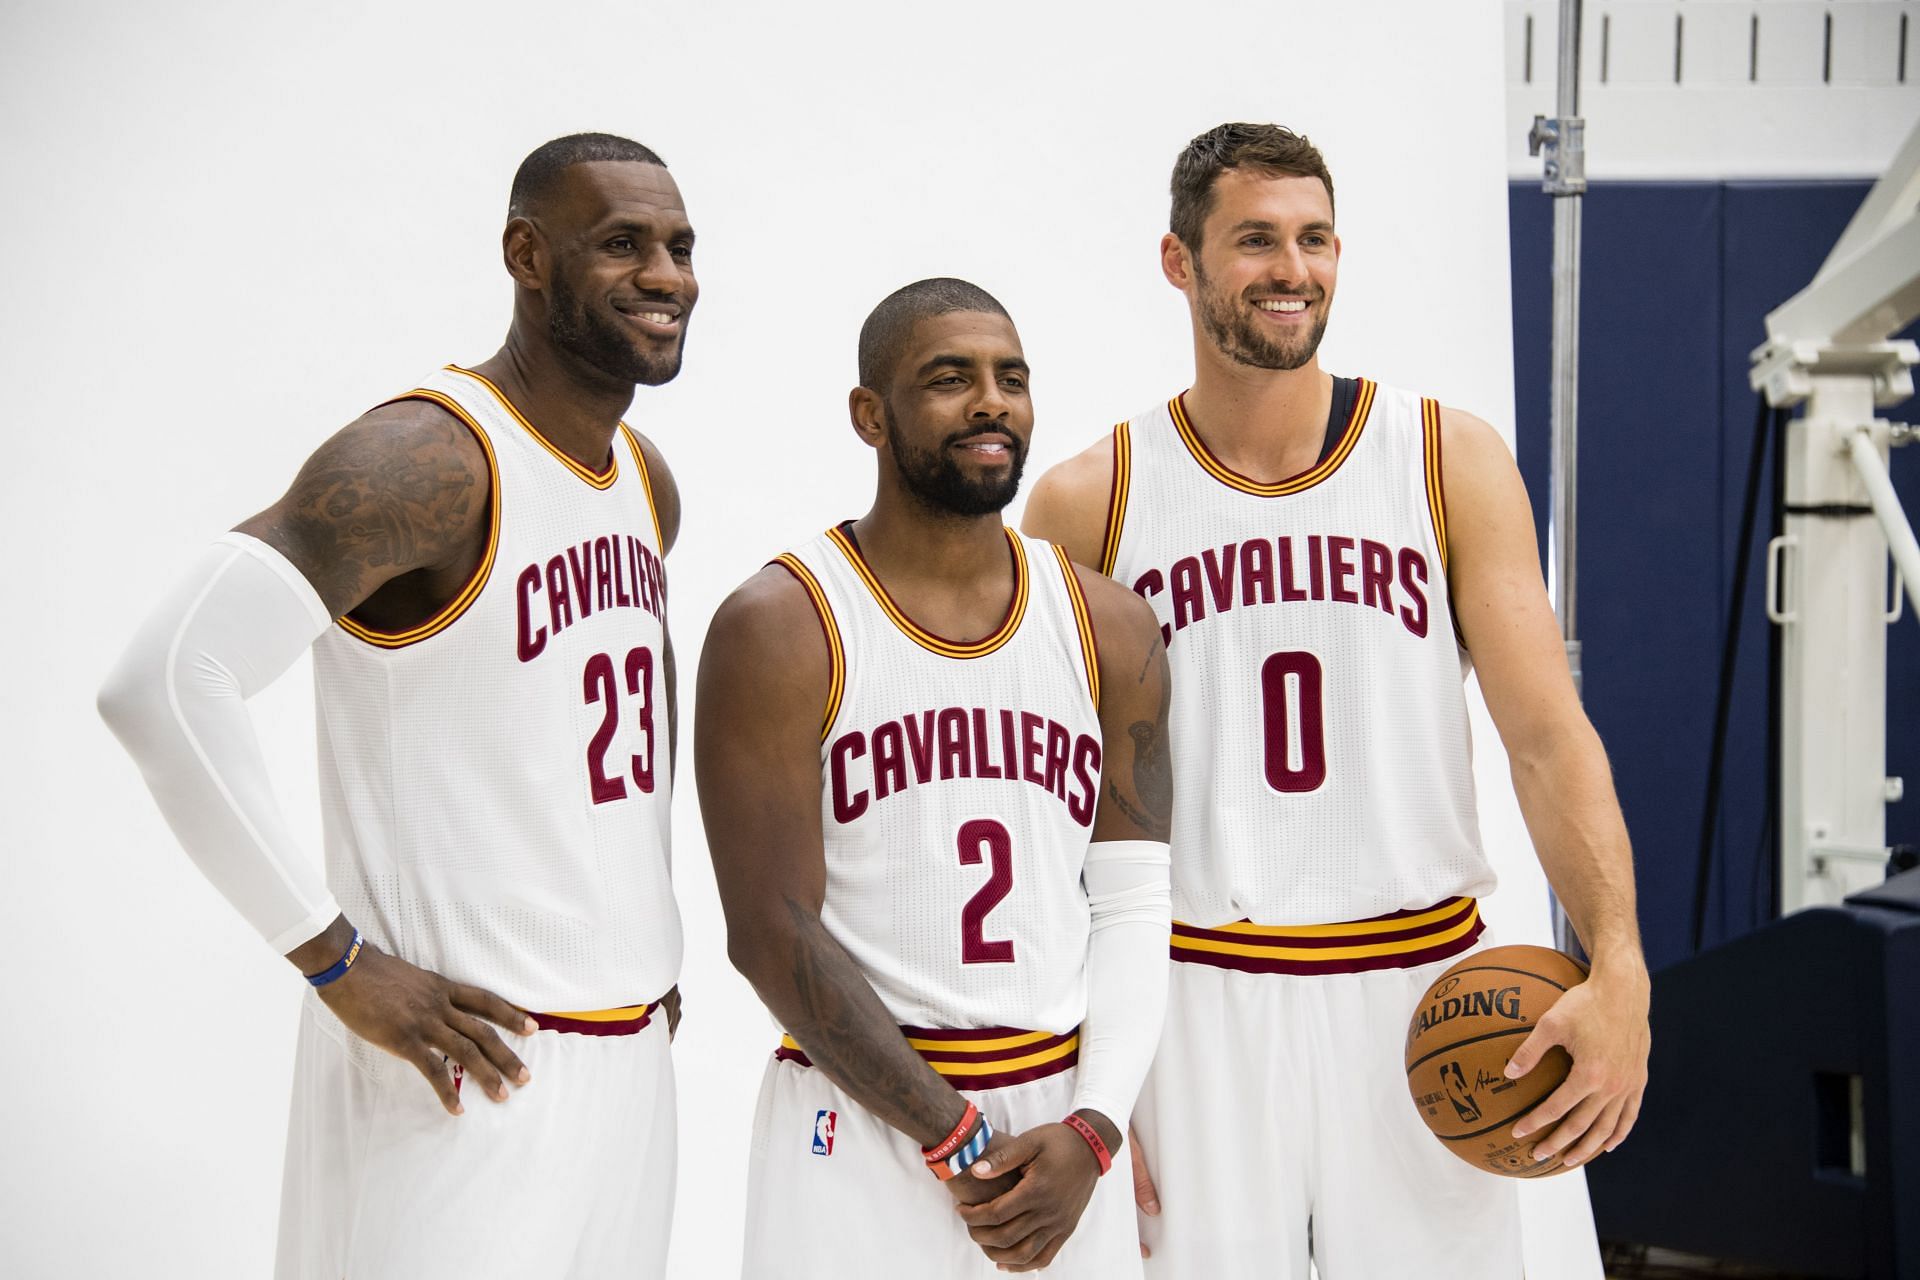 LeBron James (left) during the Cleveland Cavaliers Media Day